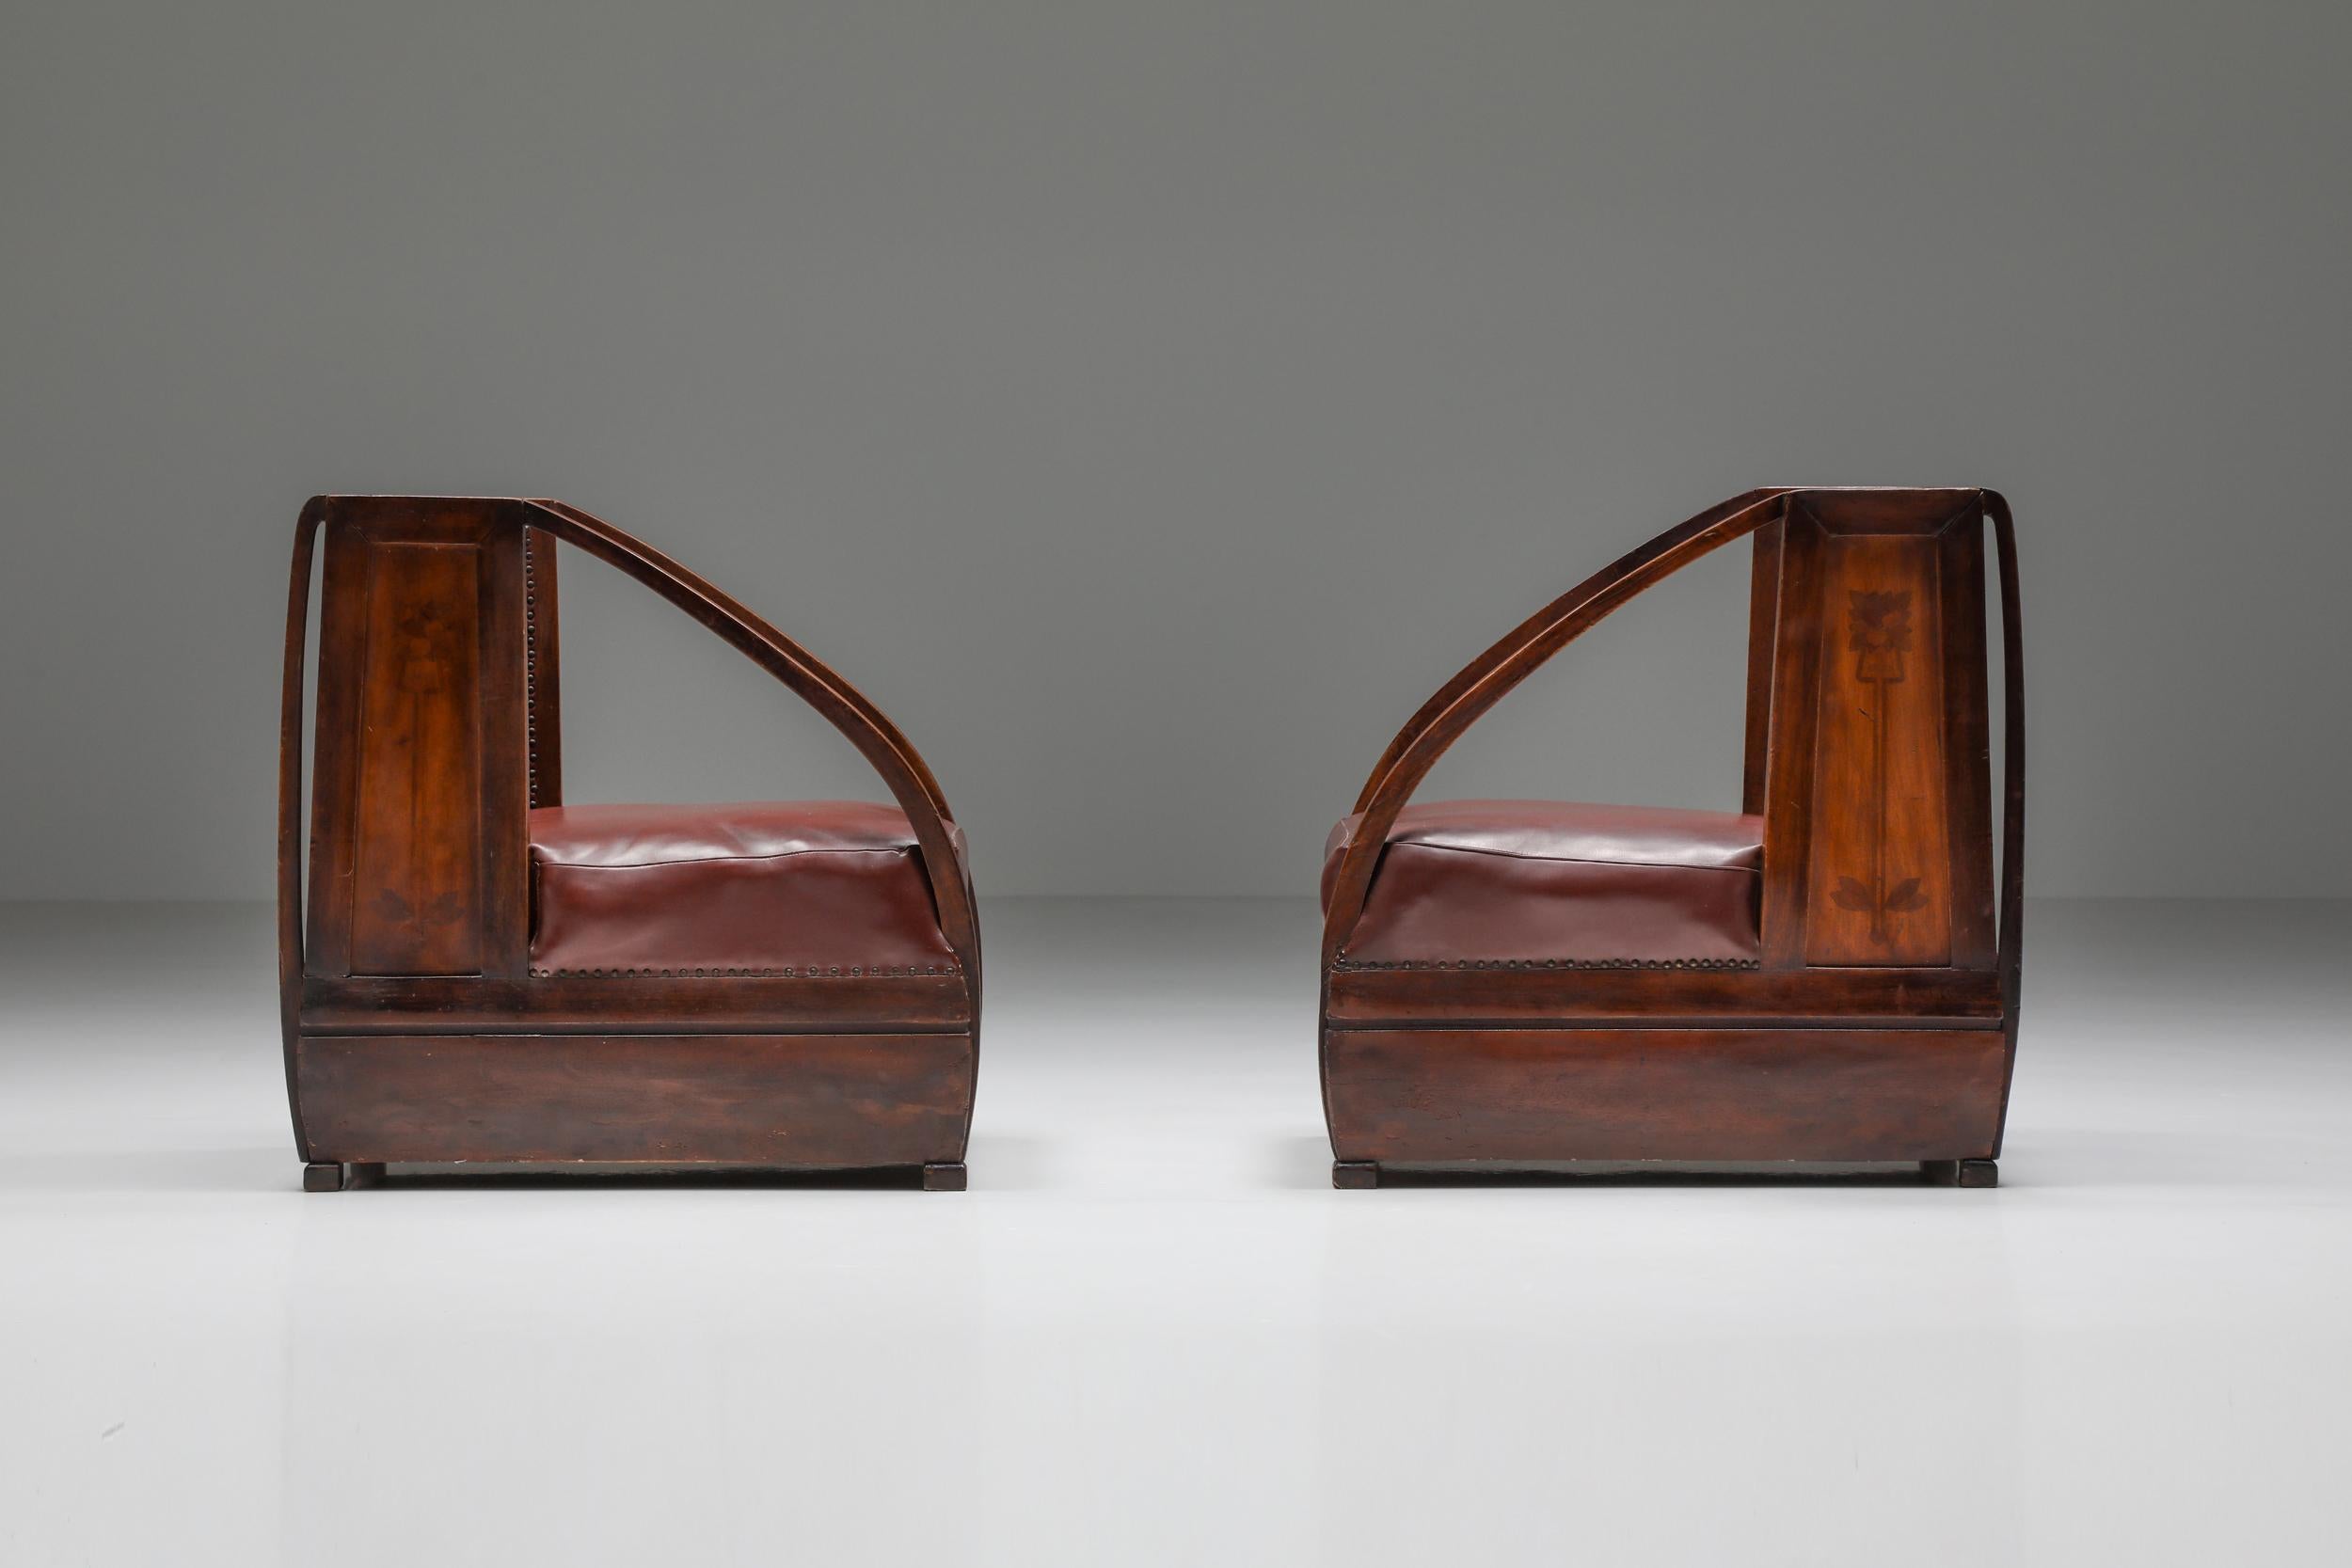 20th Century Art Nouveau Carlo and Piero Zen Pair of Armchairs, Fruitwood, Mahogany, 1910 For Sale